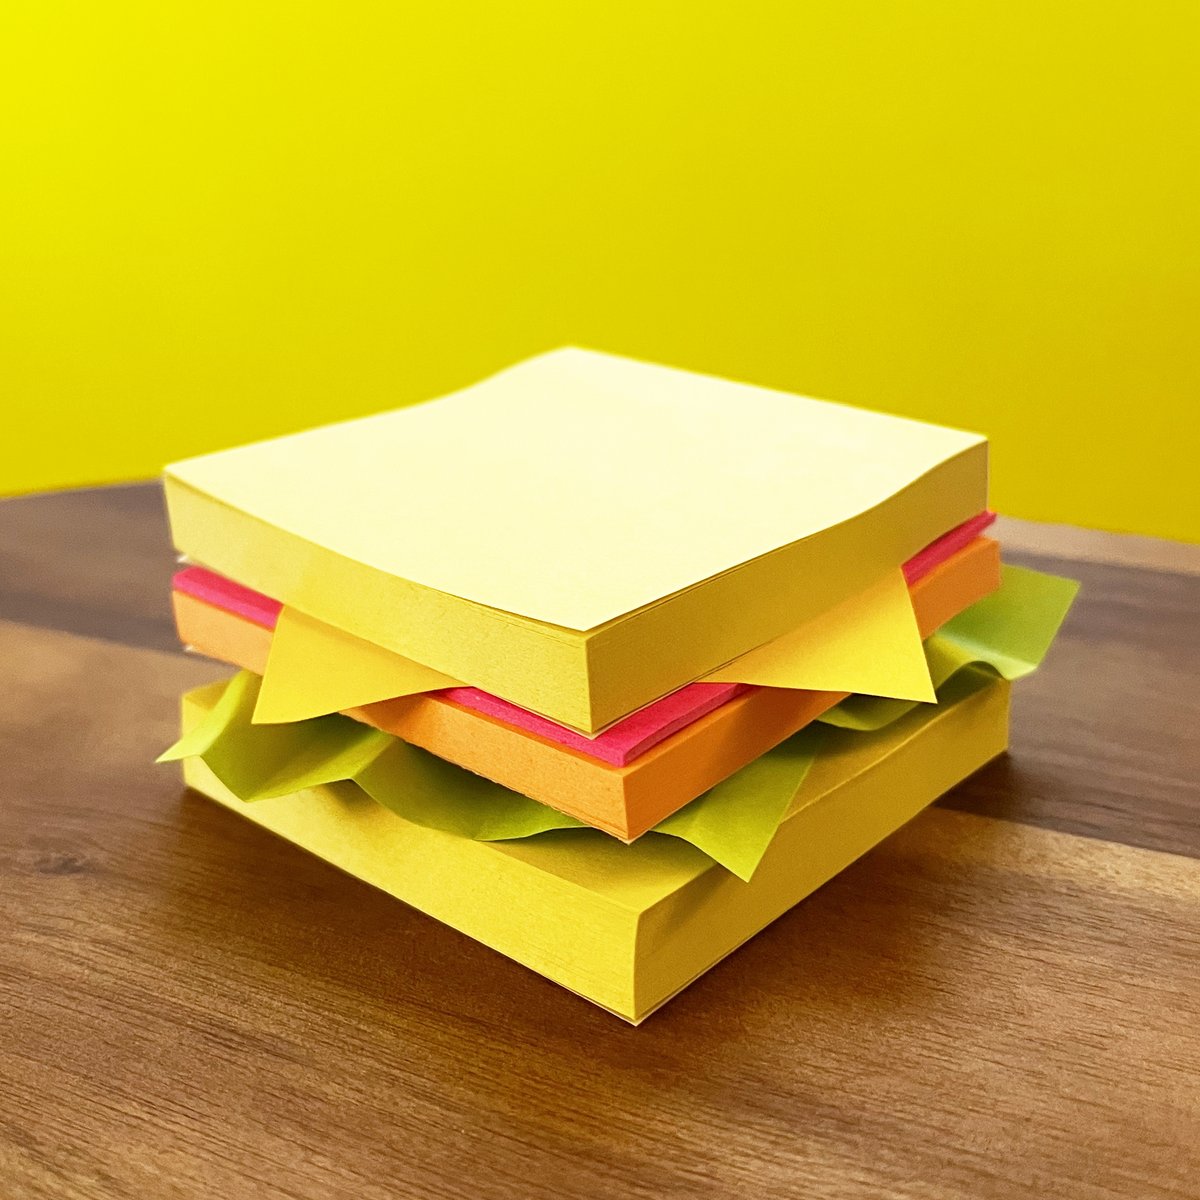 Stacking up something tasty for National Sandwich Day (for looks only, please don't eat). What's your go-to sandwich? #NationalSandwichDay #postit